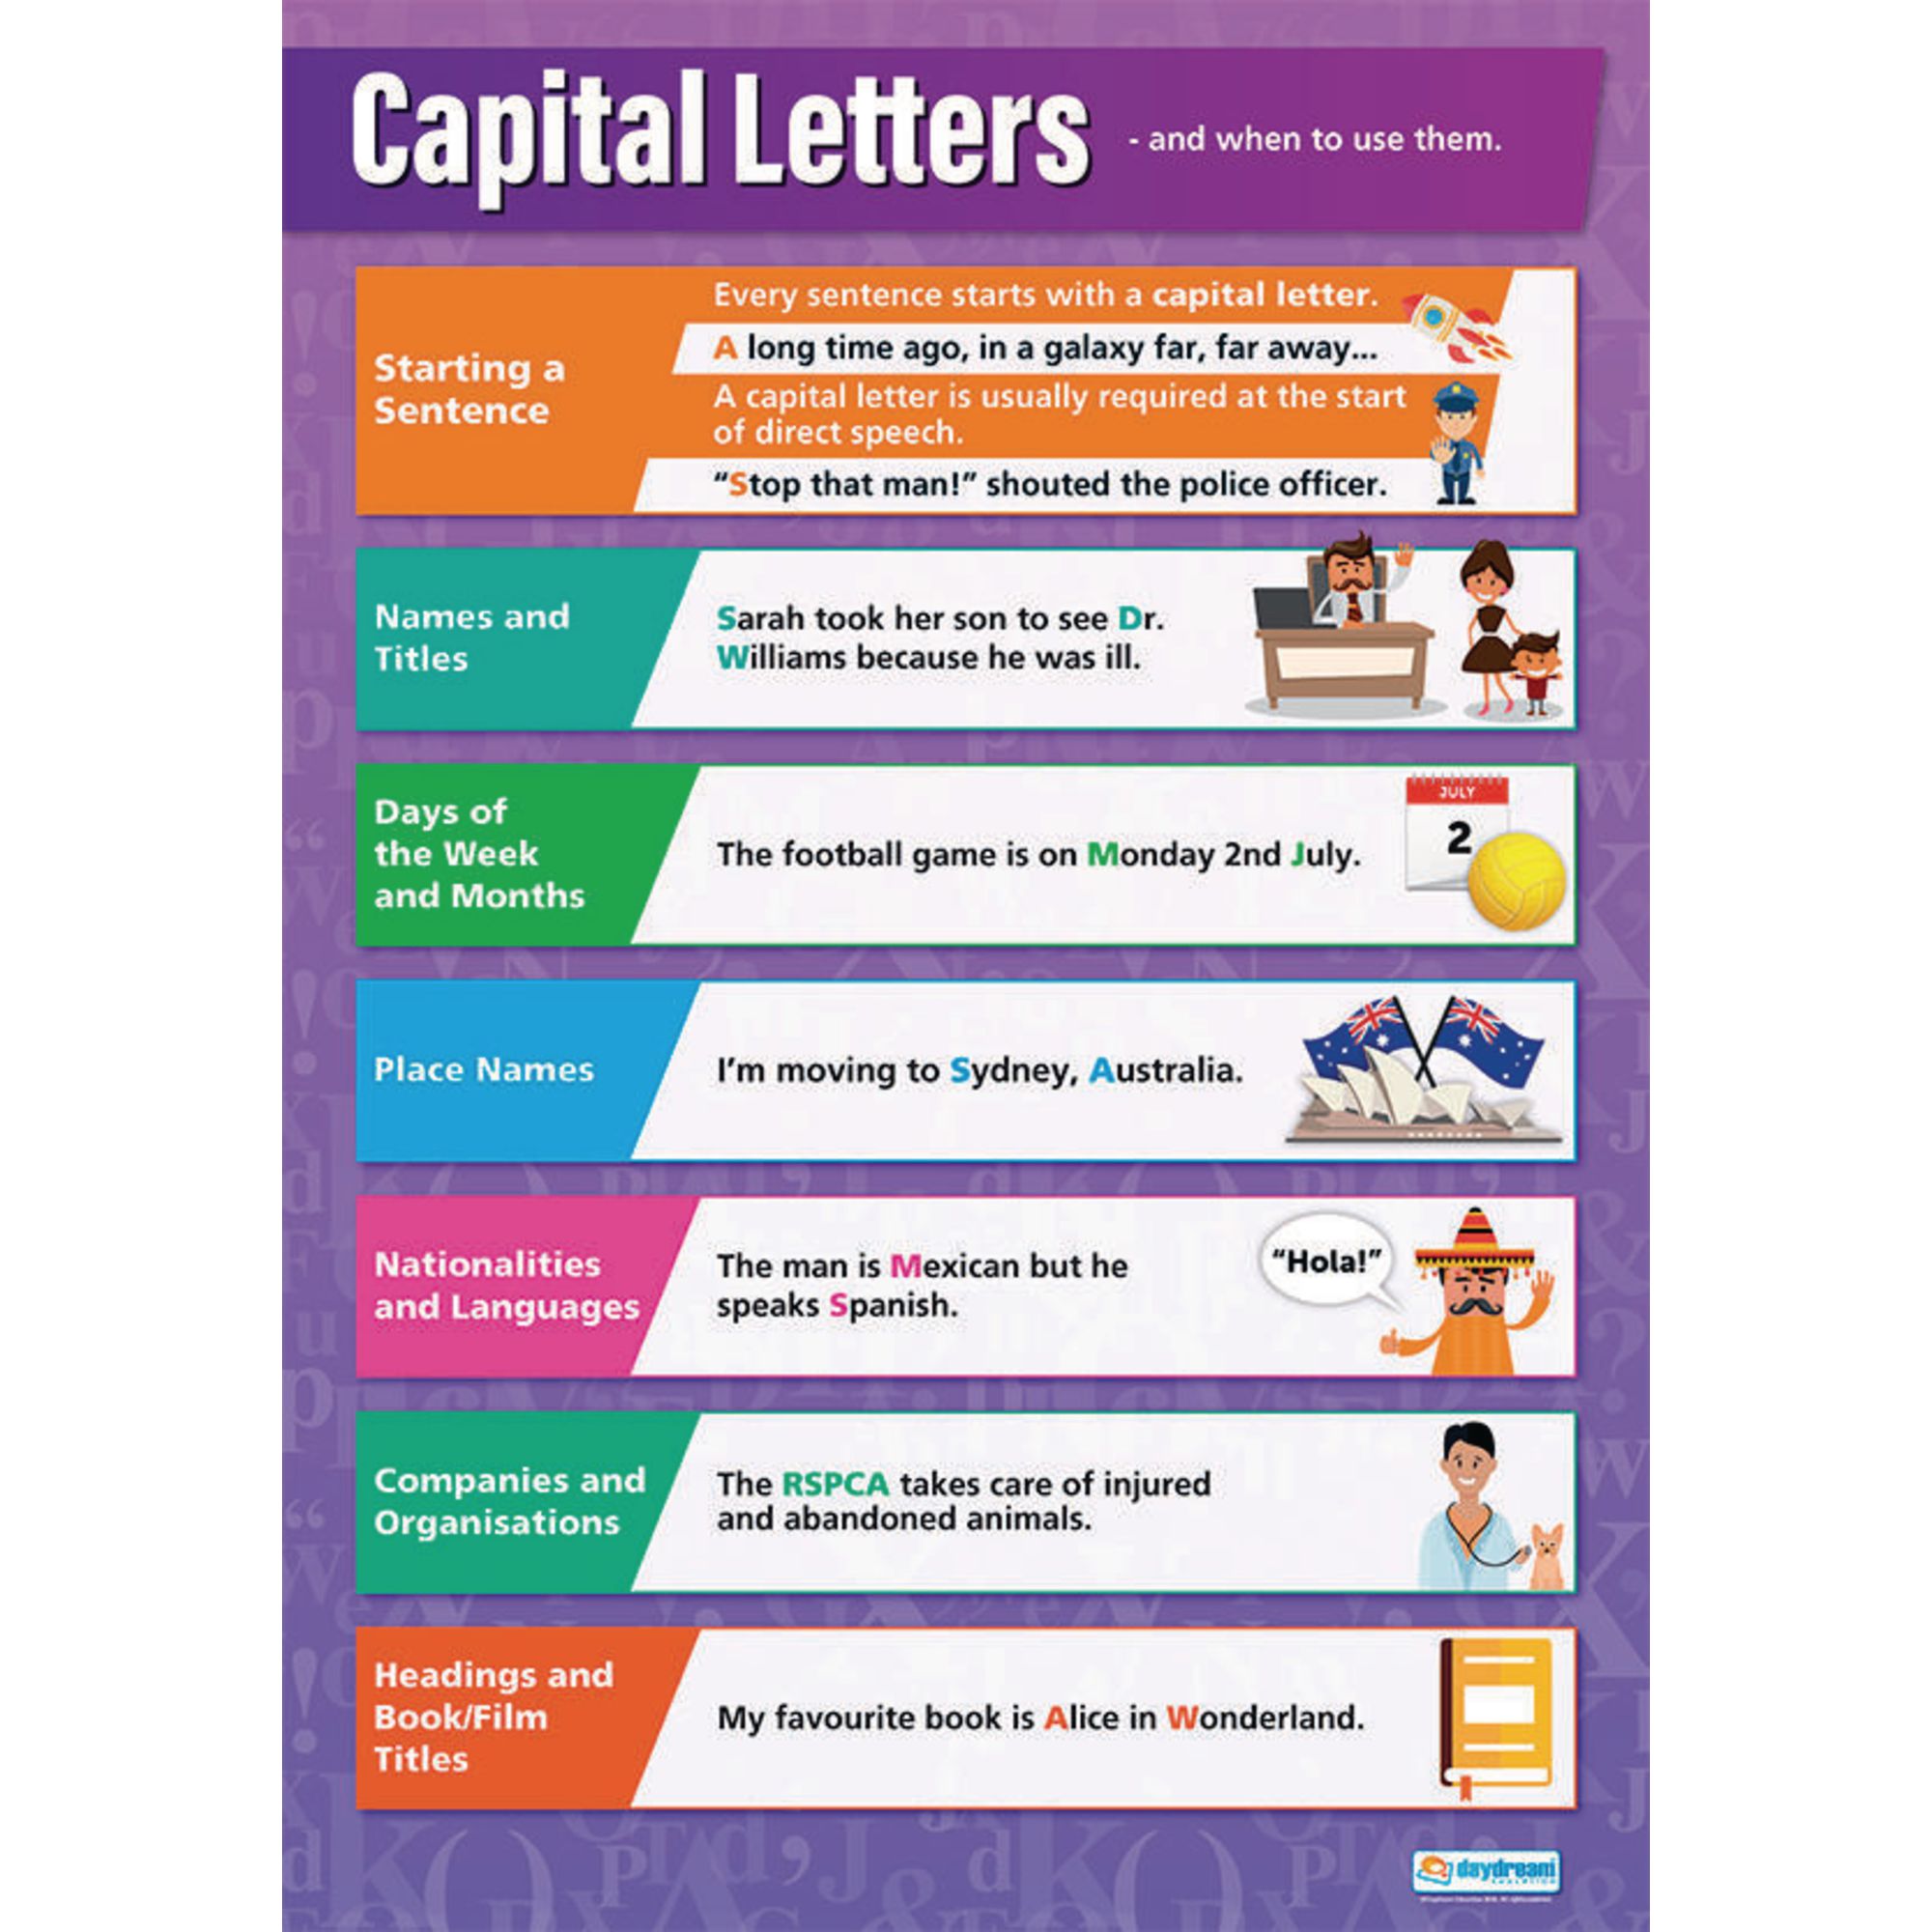 capital-letters-poster-pro-source